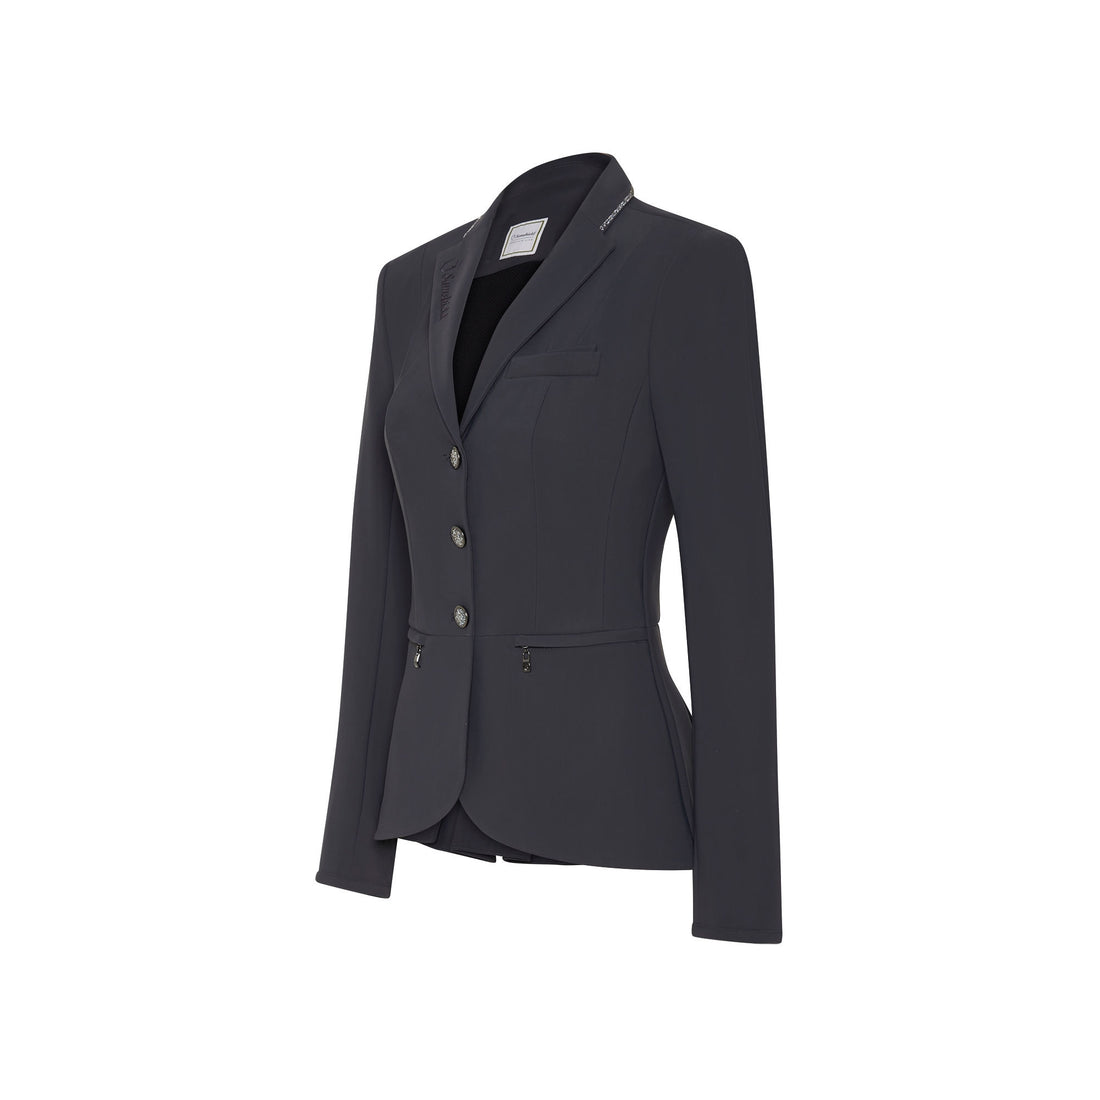 The Samshield Victorine Navy Crystal Fabric jacket pairs breathable, high stretch fabric with an incredibly flattering design thanks to the long fan finish on the reverse and shorter cut at the front, allowing the rider to feel and perform at their best.